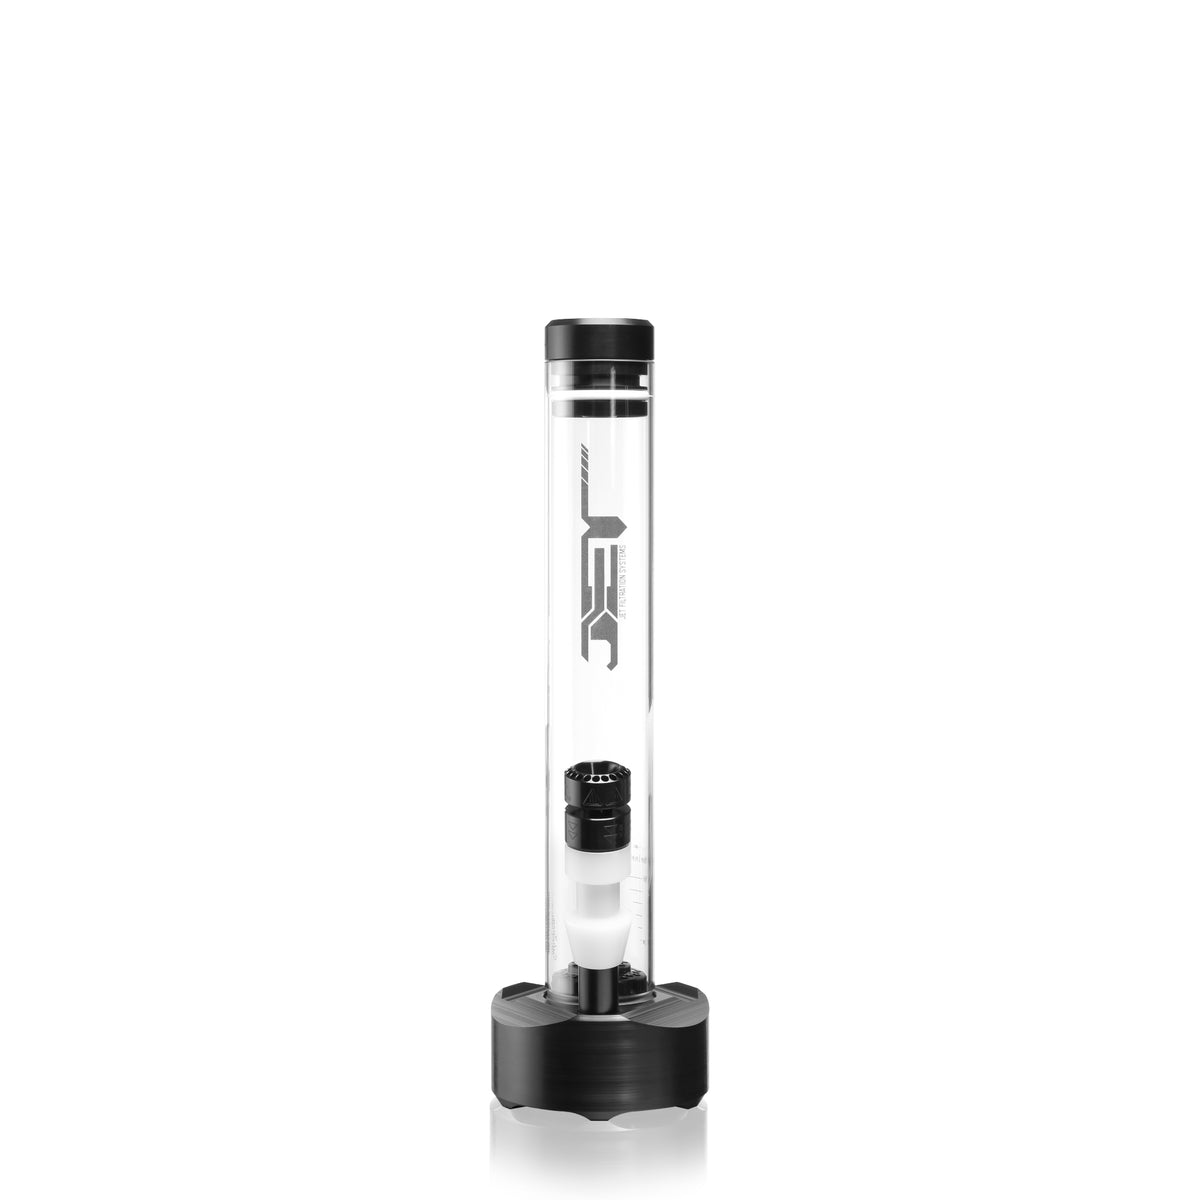 Front view of black extra-small JET Waterpipe